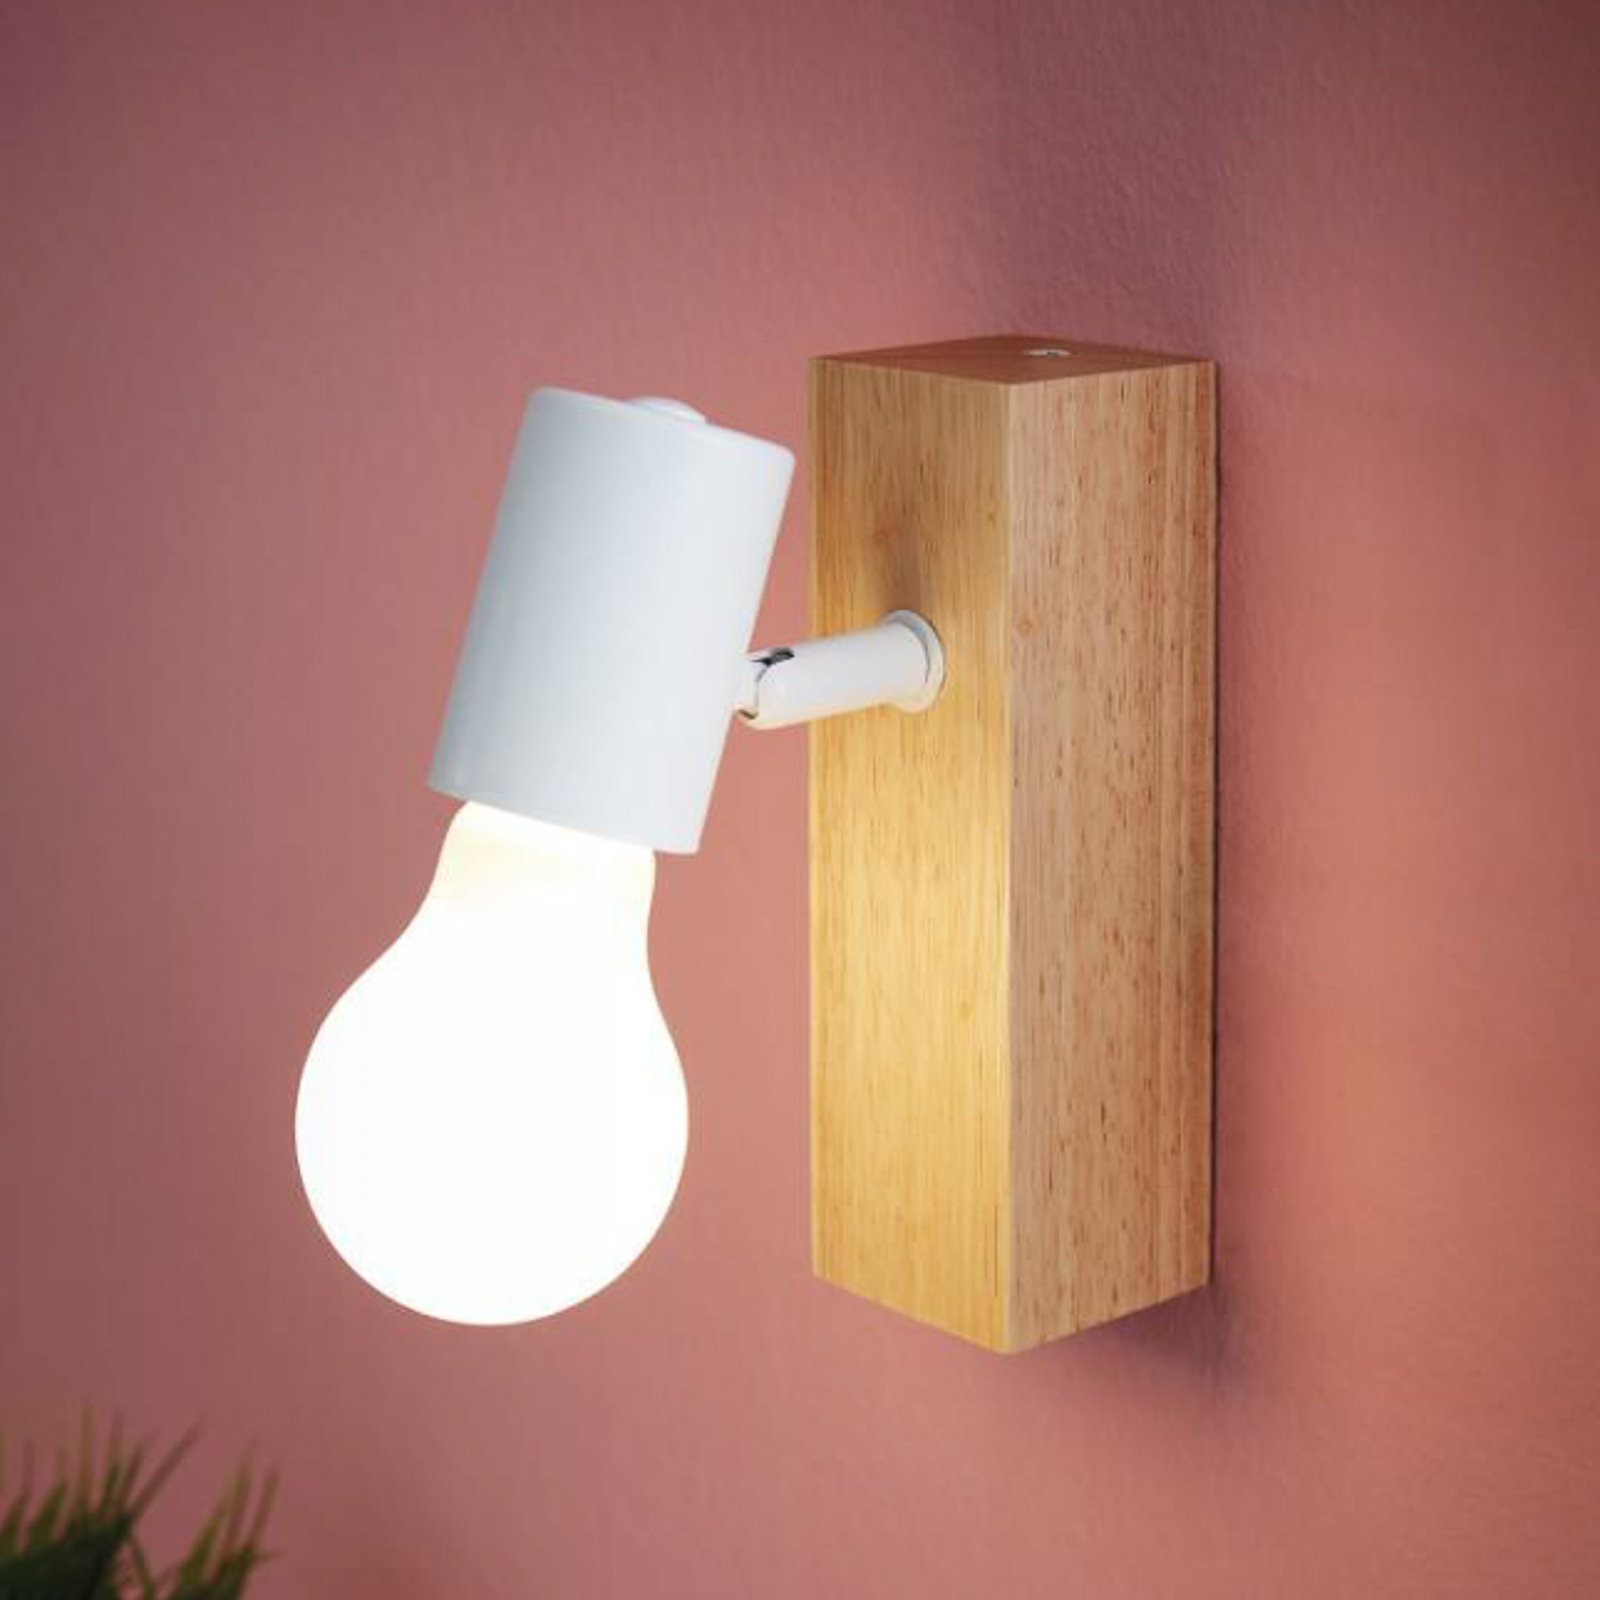 Townshend 3 wall light made of wood, white